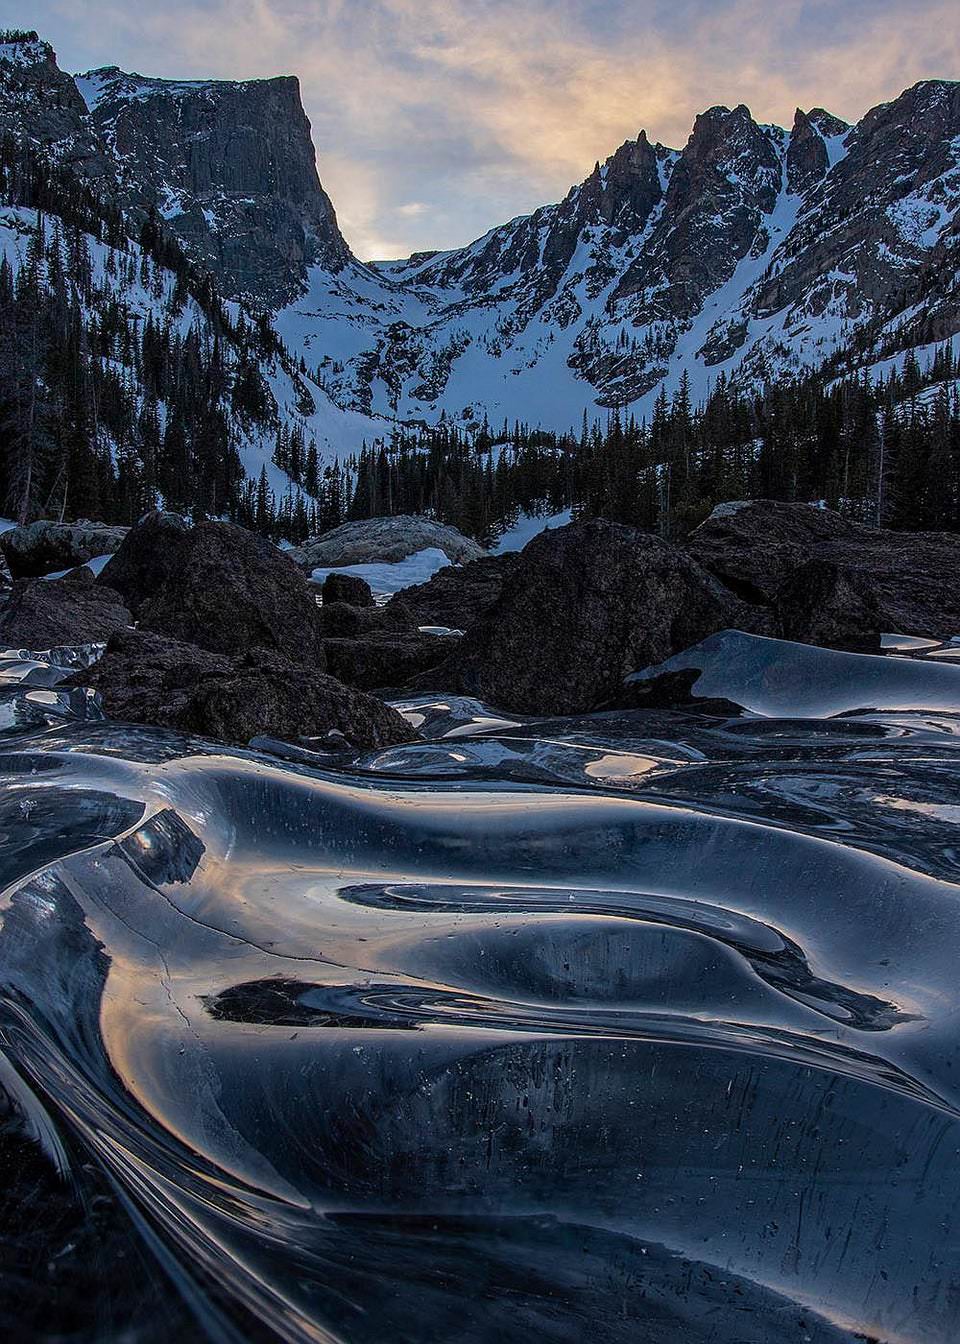 Early morning at a mountain lake in Colorado by photographer Eric Gross